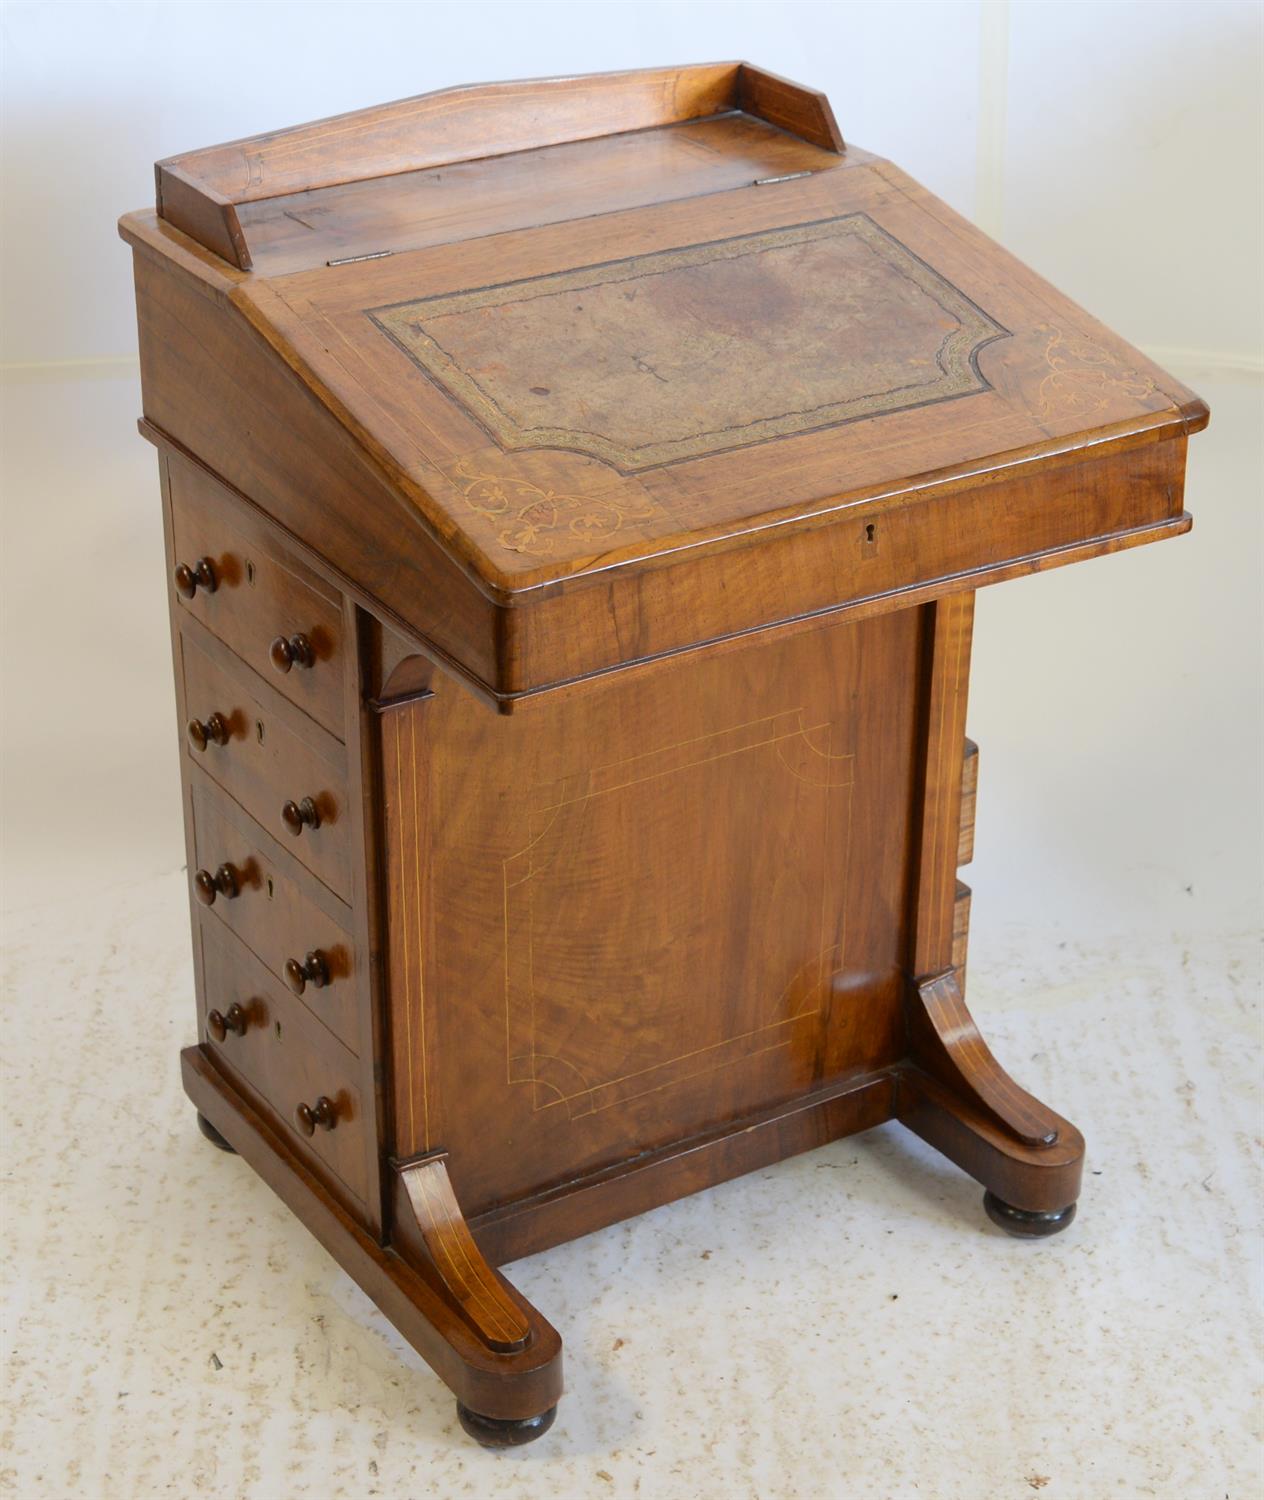 Victorian inlaid walnut davenport, the slope top with leather writing surface revealing fitted